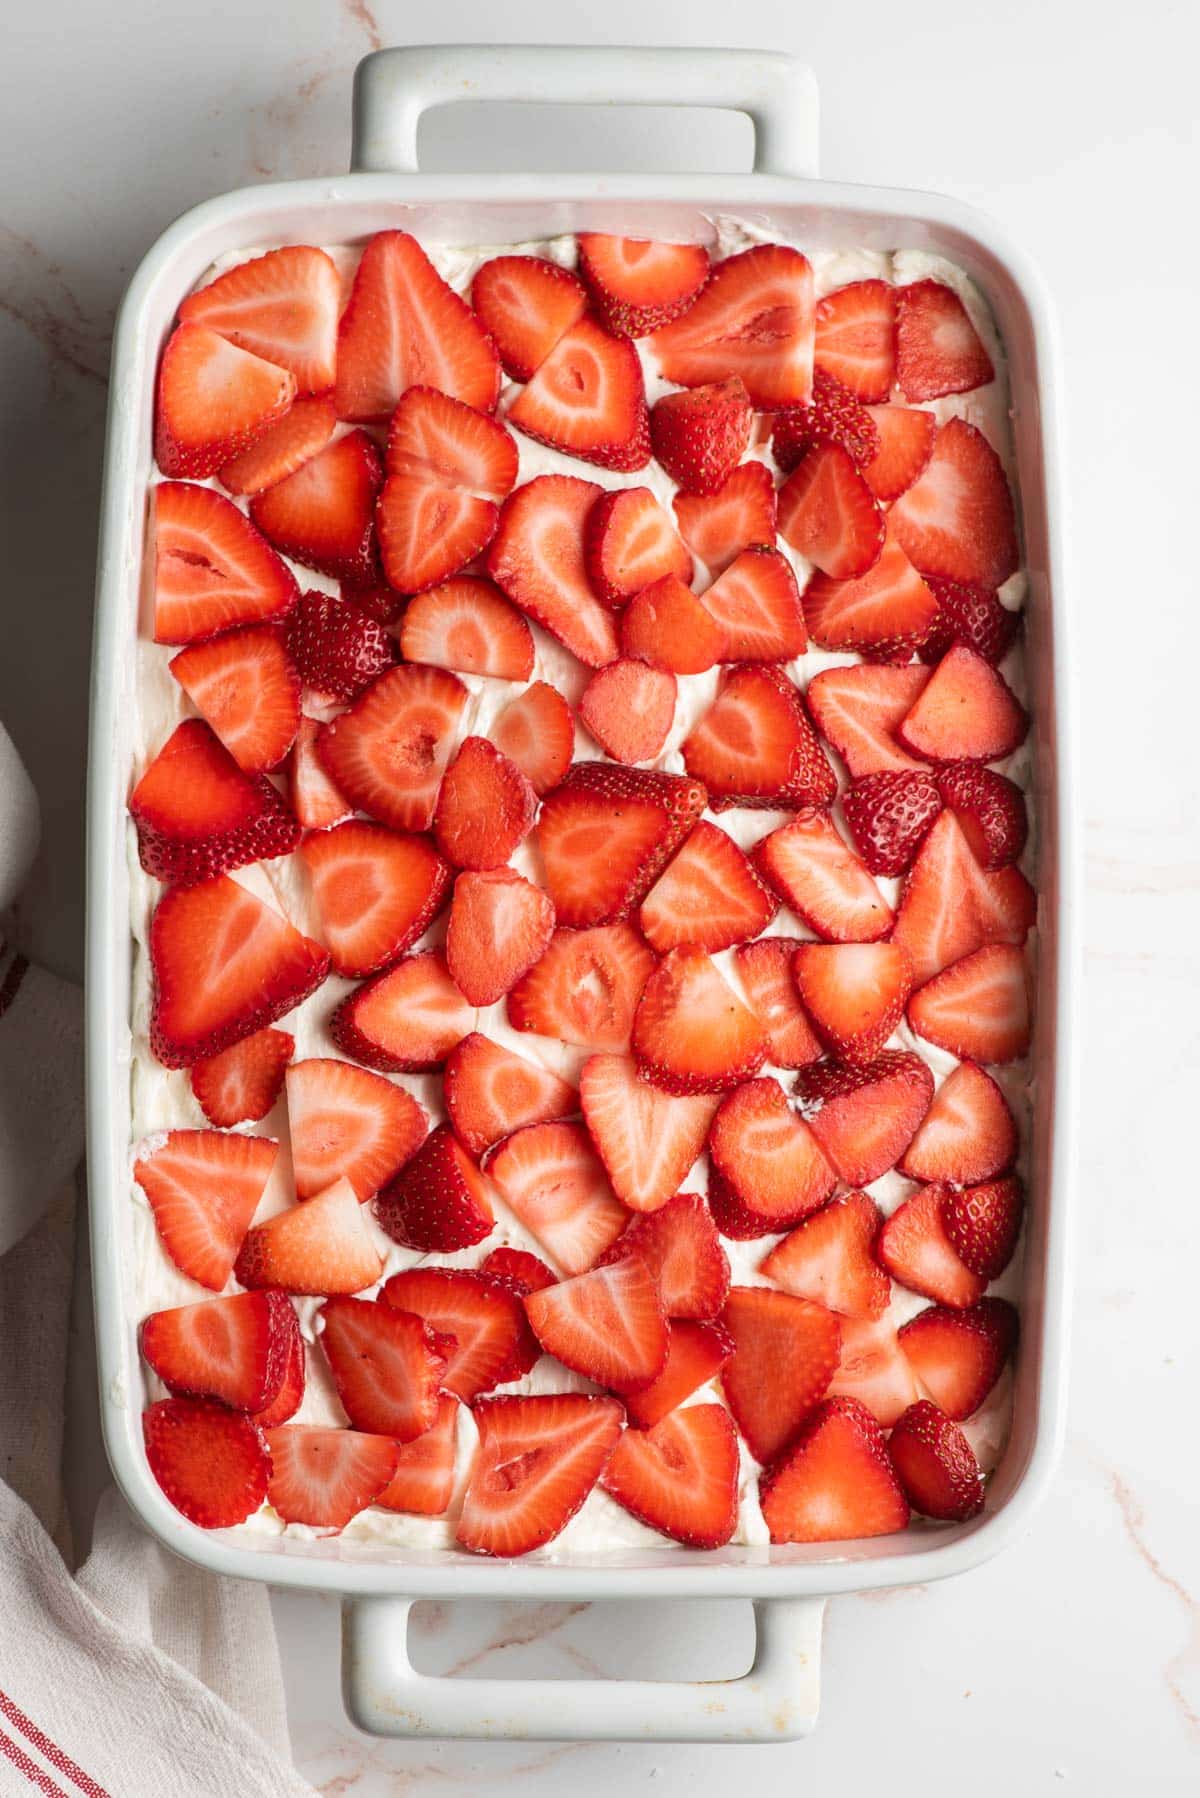 Strawberries spread over a sweetened cream cheese in a casserole dish.